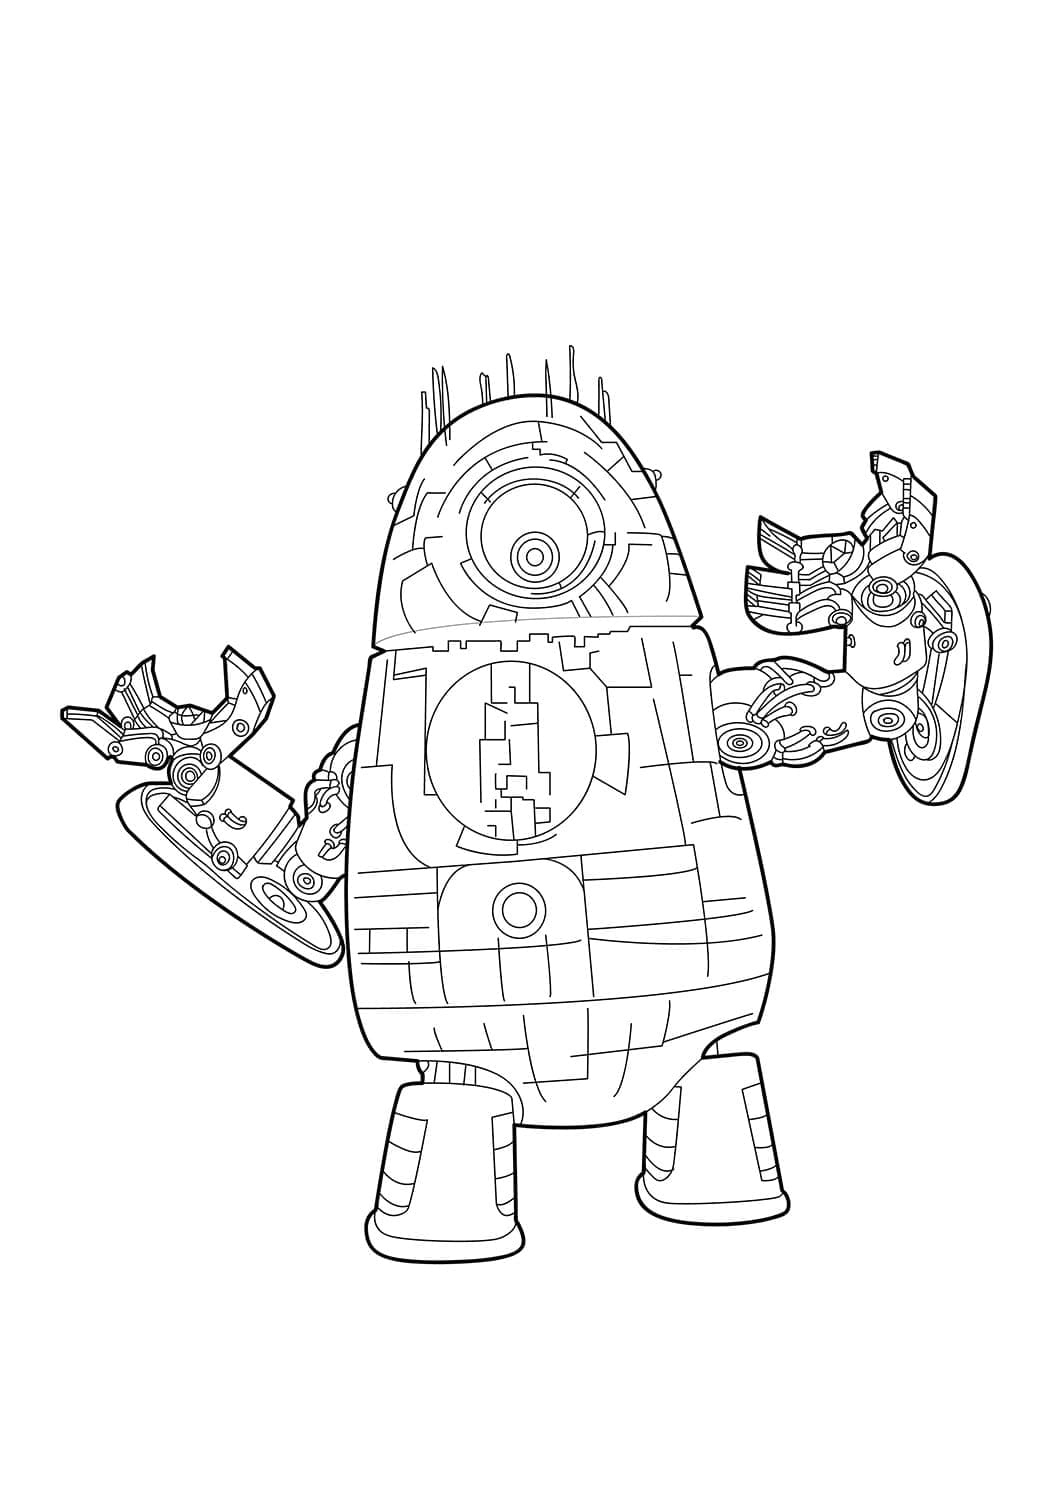 Robot 3 coloring page